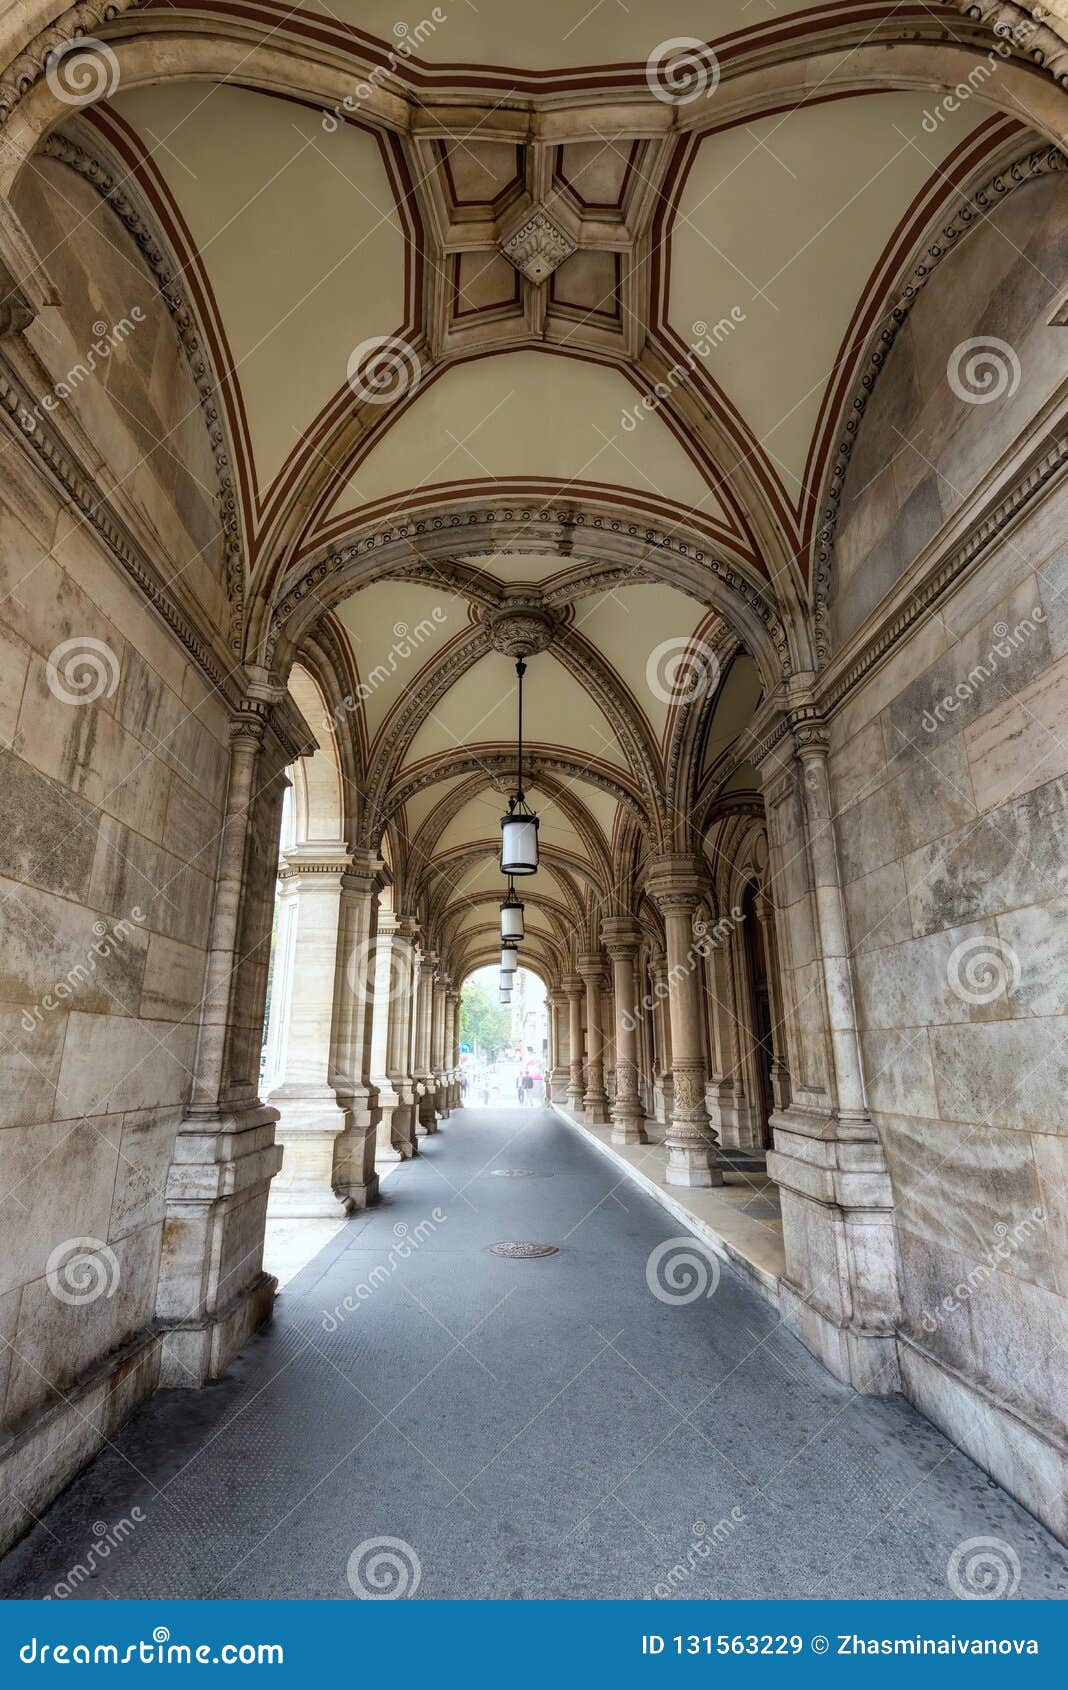 Archway In Vienna Stock Image Image Of Ornament Gothic 131563229